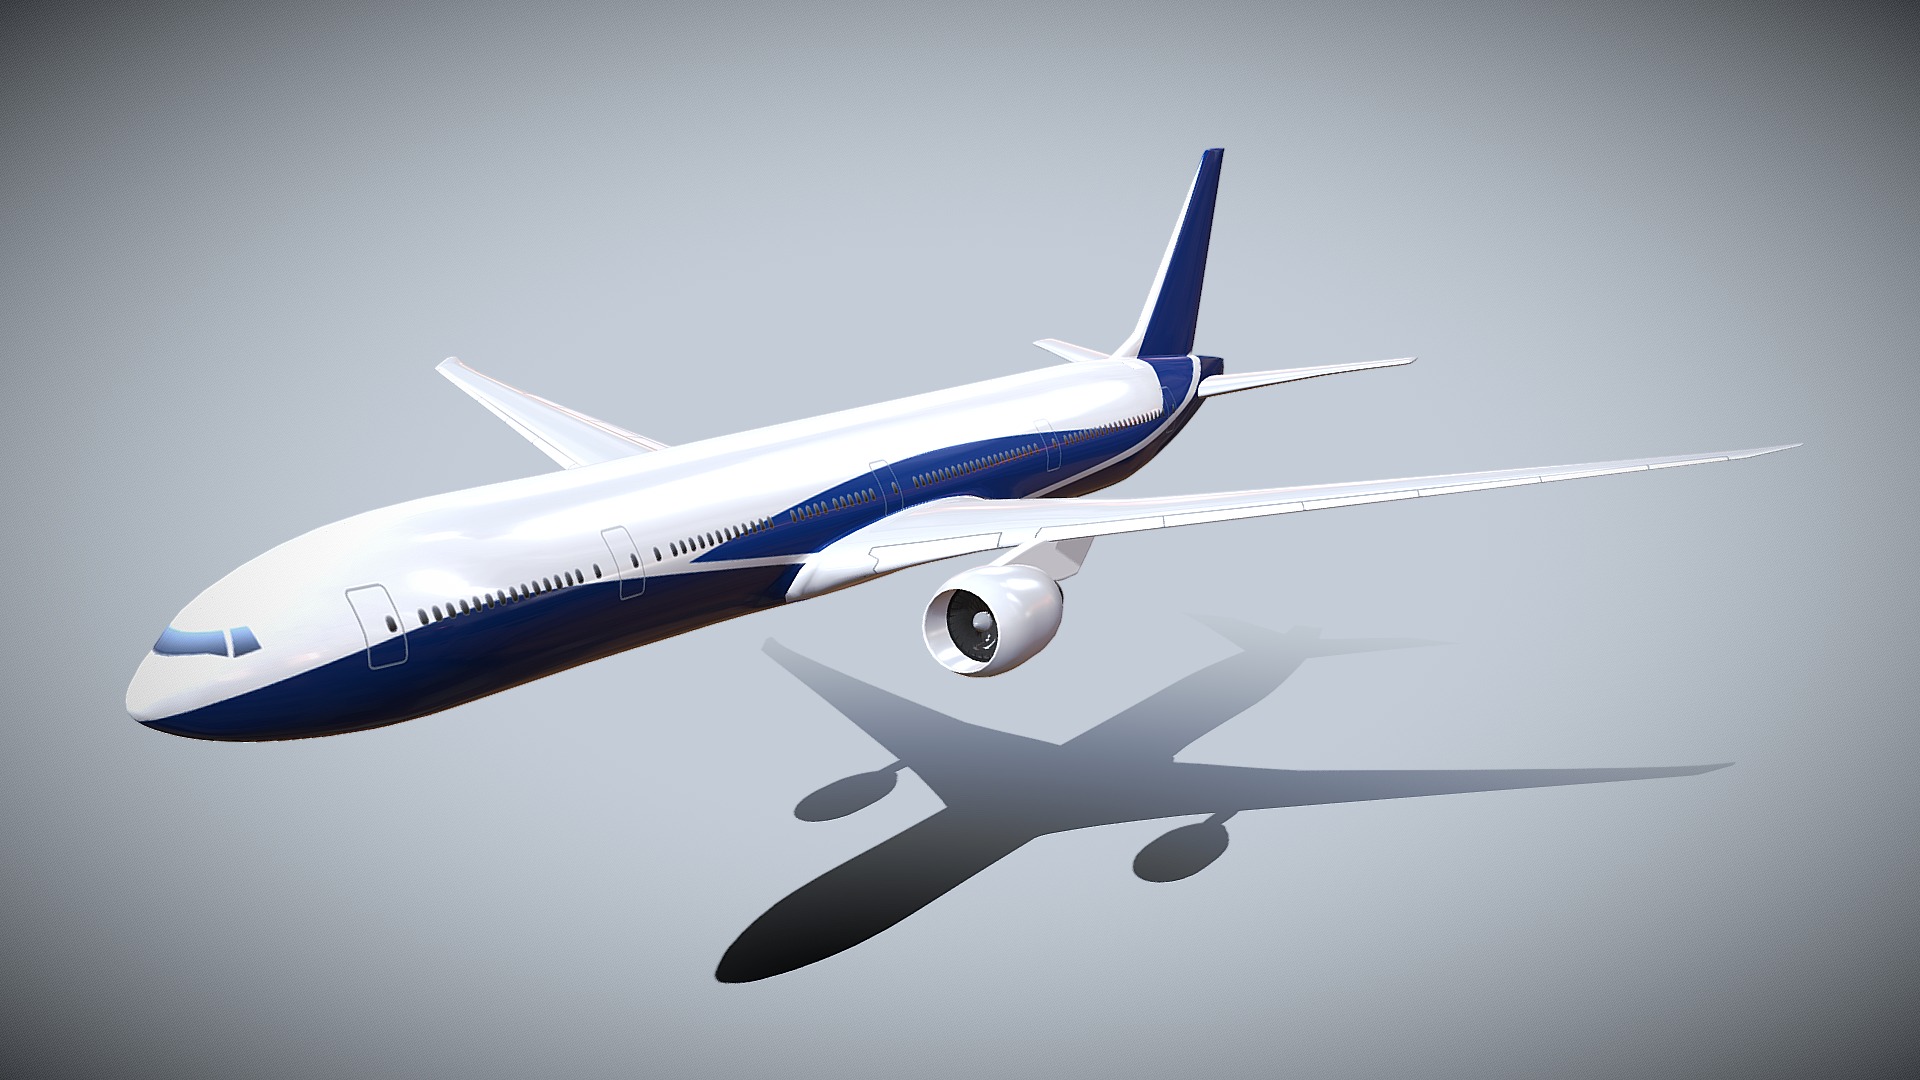 3D model Boeing 777-300ER commercial airliner - This is a 3D model of the Boeing 777-300ER commercial airliner. The 3D model is about a white airplane flying in the sky.